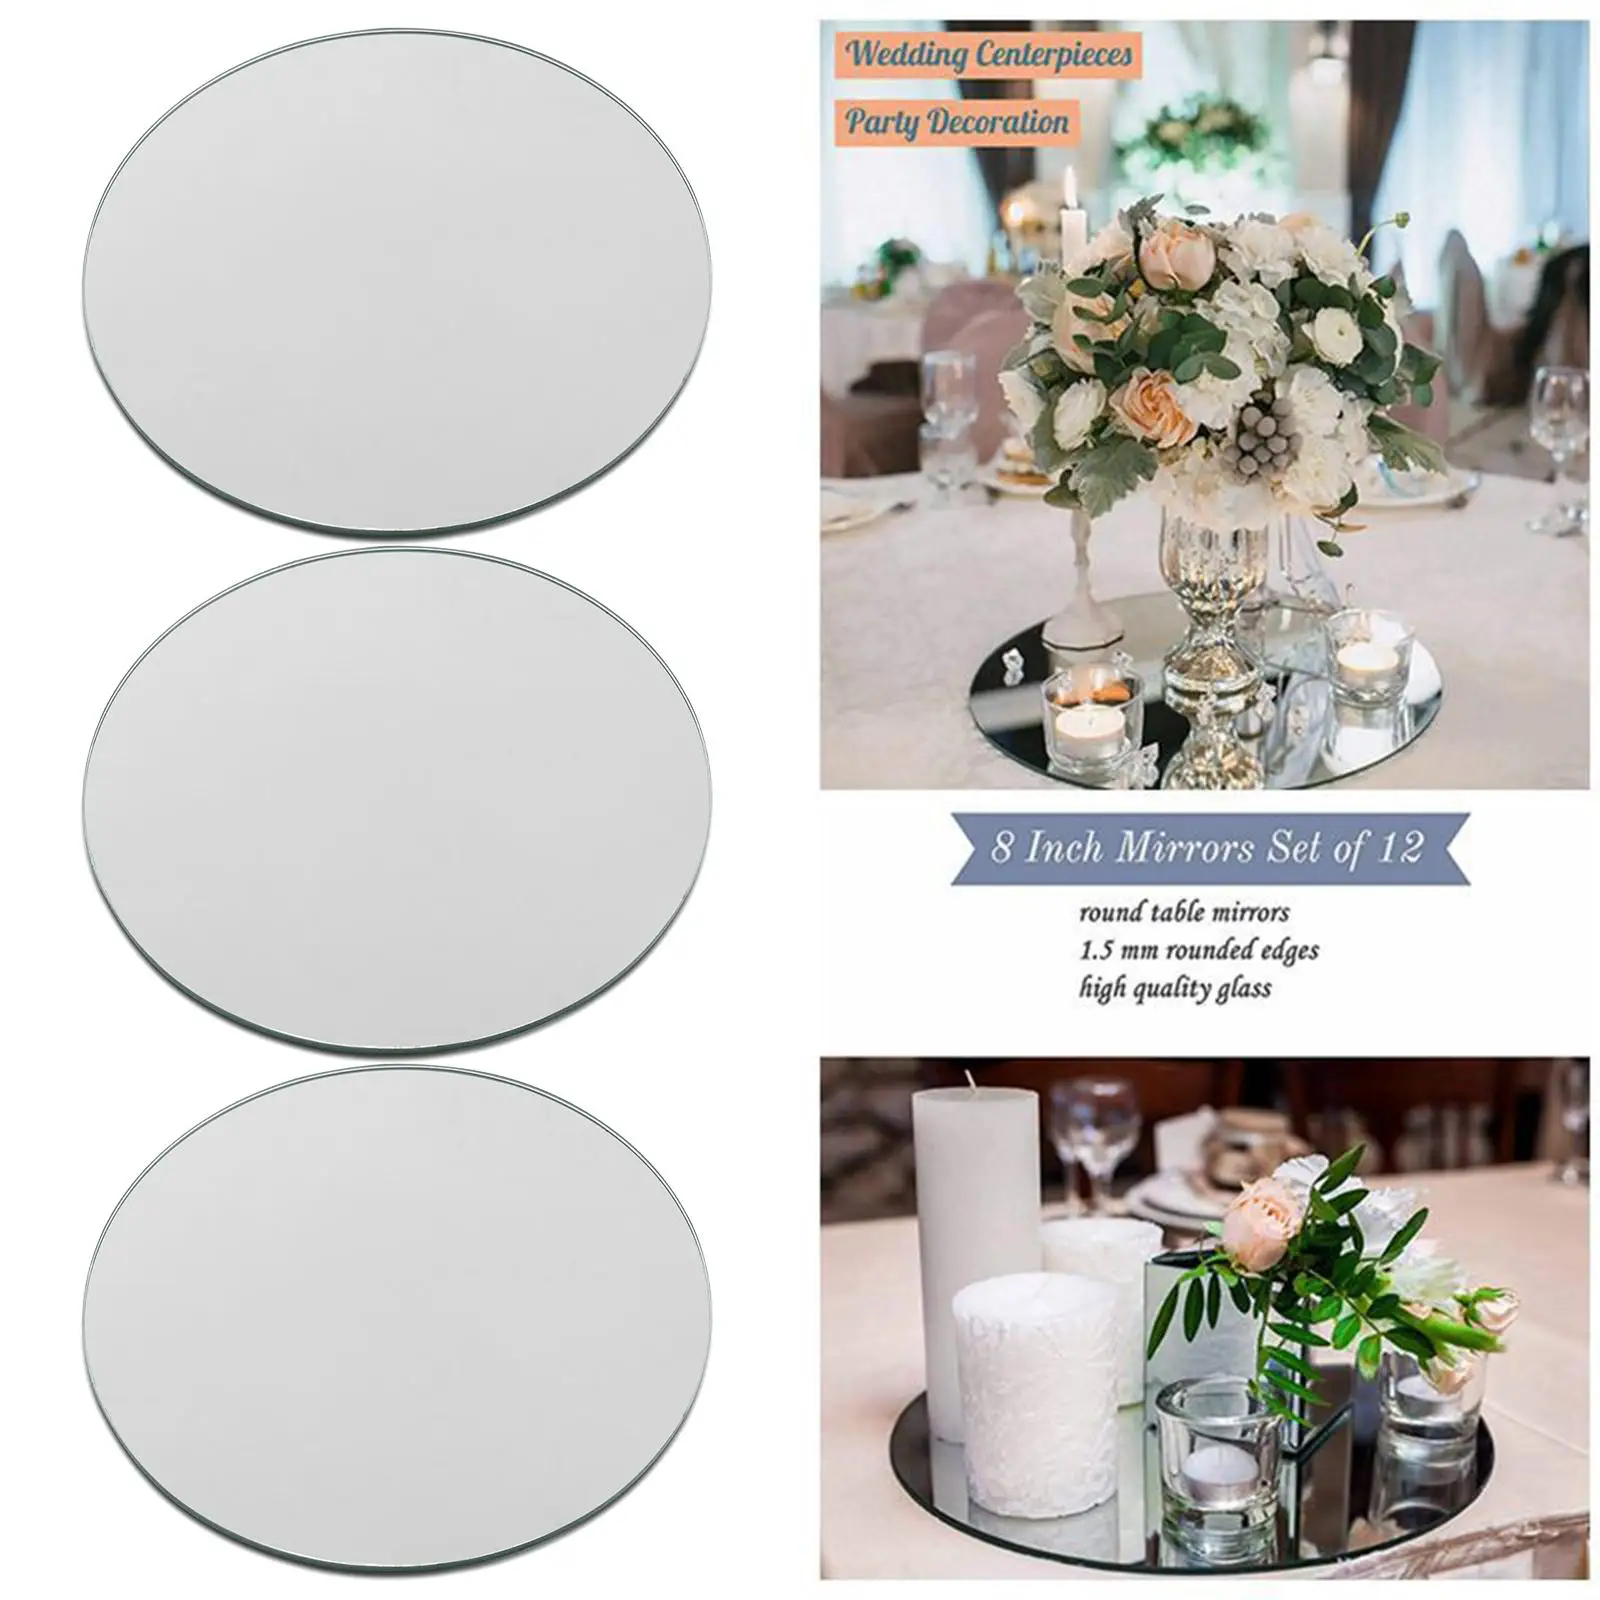 Acrylic Round Mirror Plate Candle Plate Organizer Pcs Decorative Mirror Trays for Wedding Party Table Ornament Dresser Home 